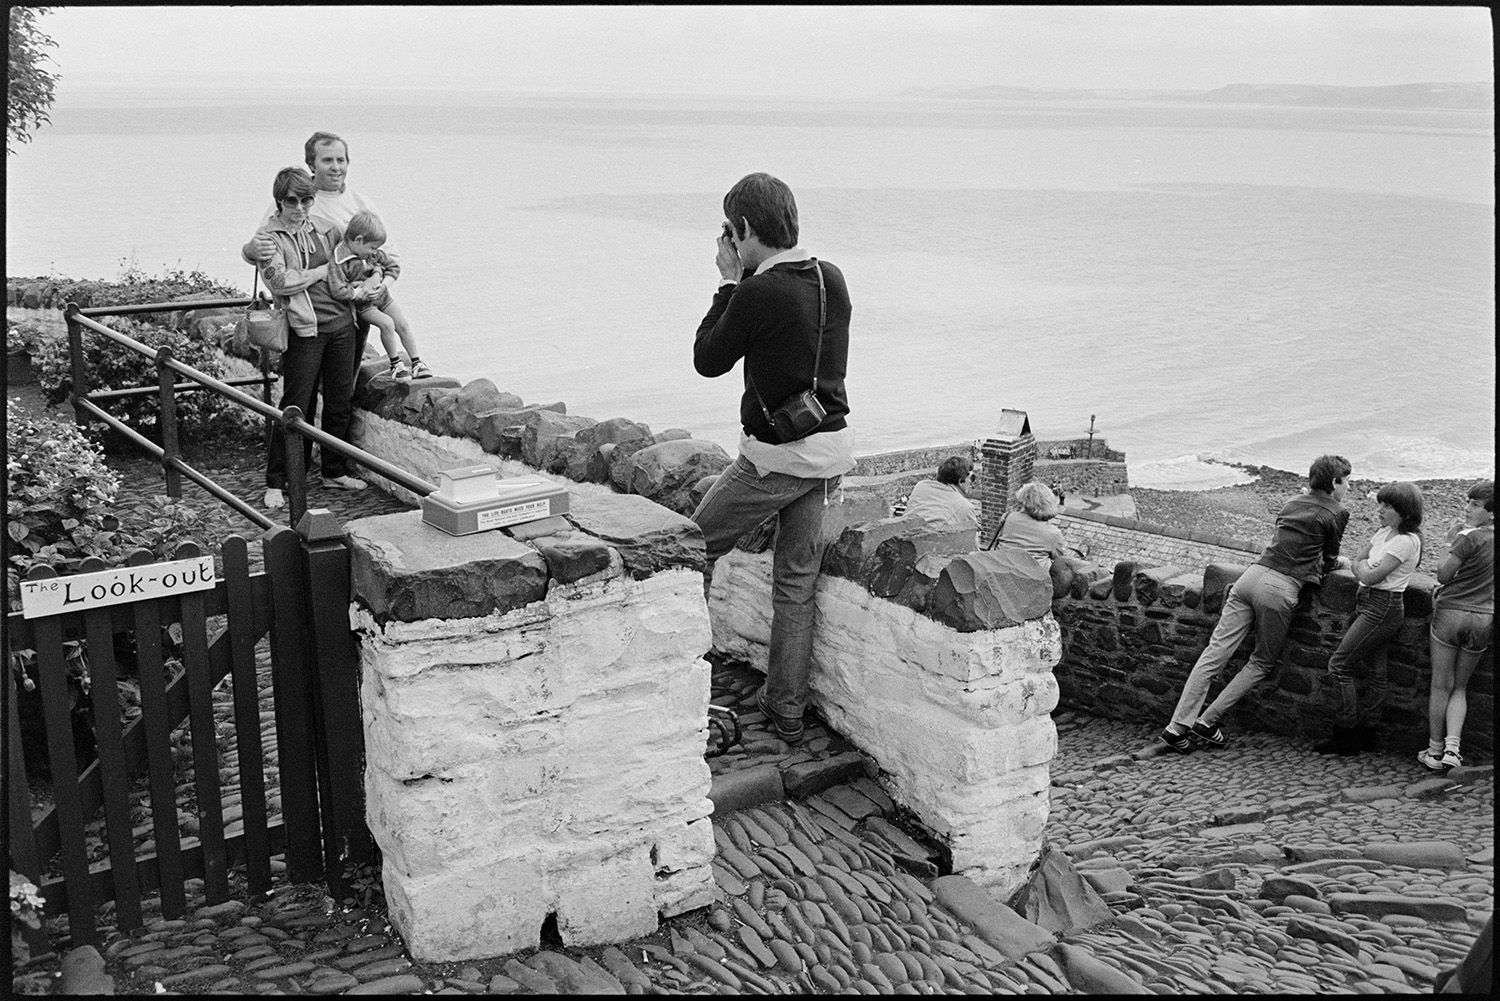 Holidaymakers, seaside village taking photographs, sunbathing, pebble beach with small boats. 
[A person taking a photograph of a family at a look out point at Clovelly. The cobbled steps leading down the to beach are visible, as well as part of the harbour wall and sea, in the background.]